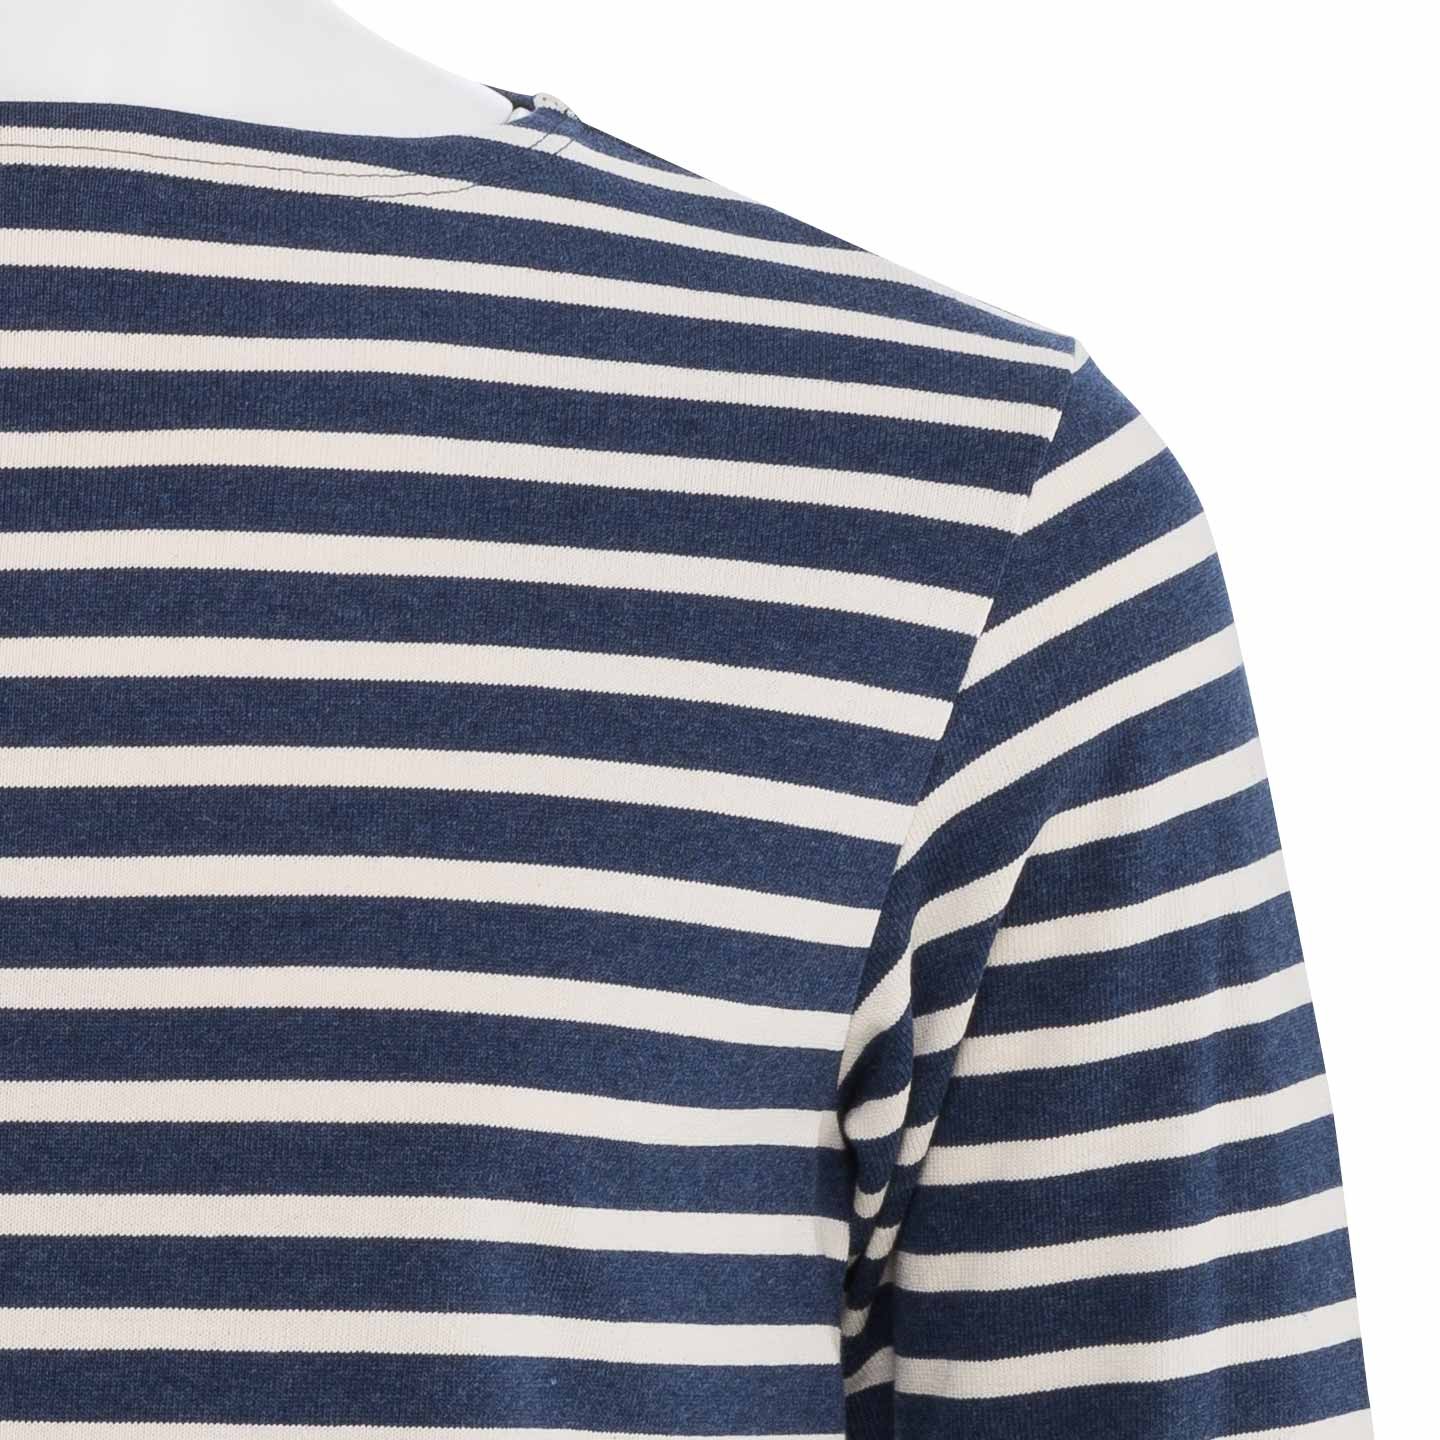 Striped shirt Mixed Waid / Ecru, unisex Orcival Made in France